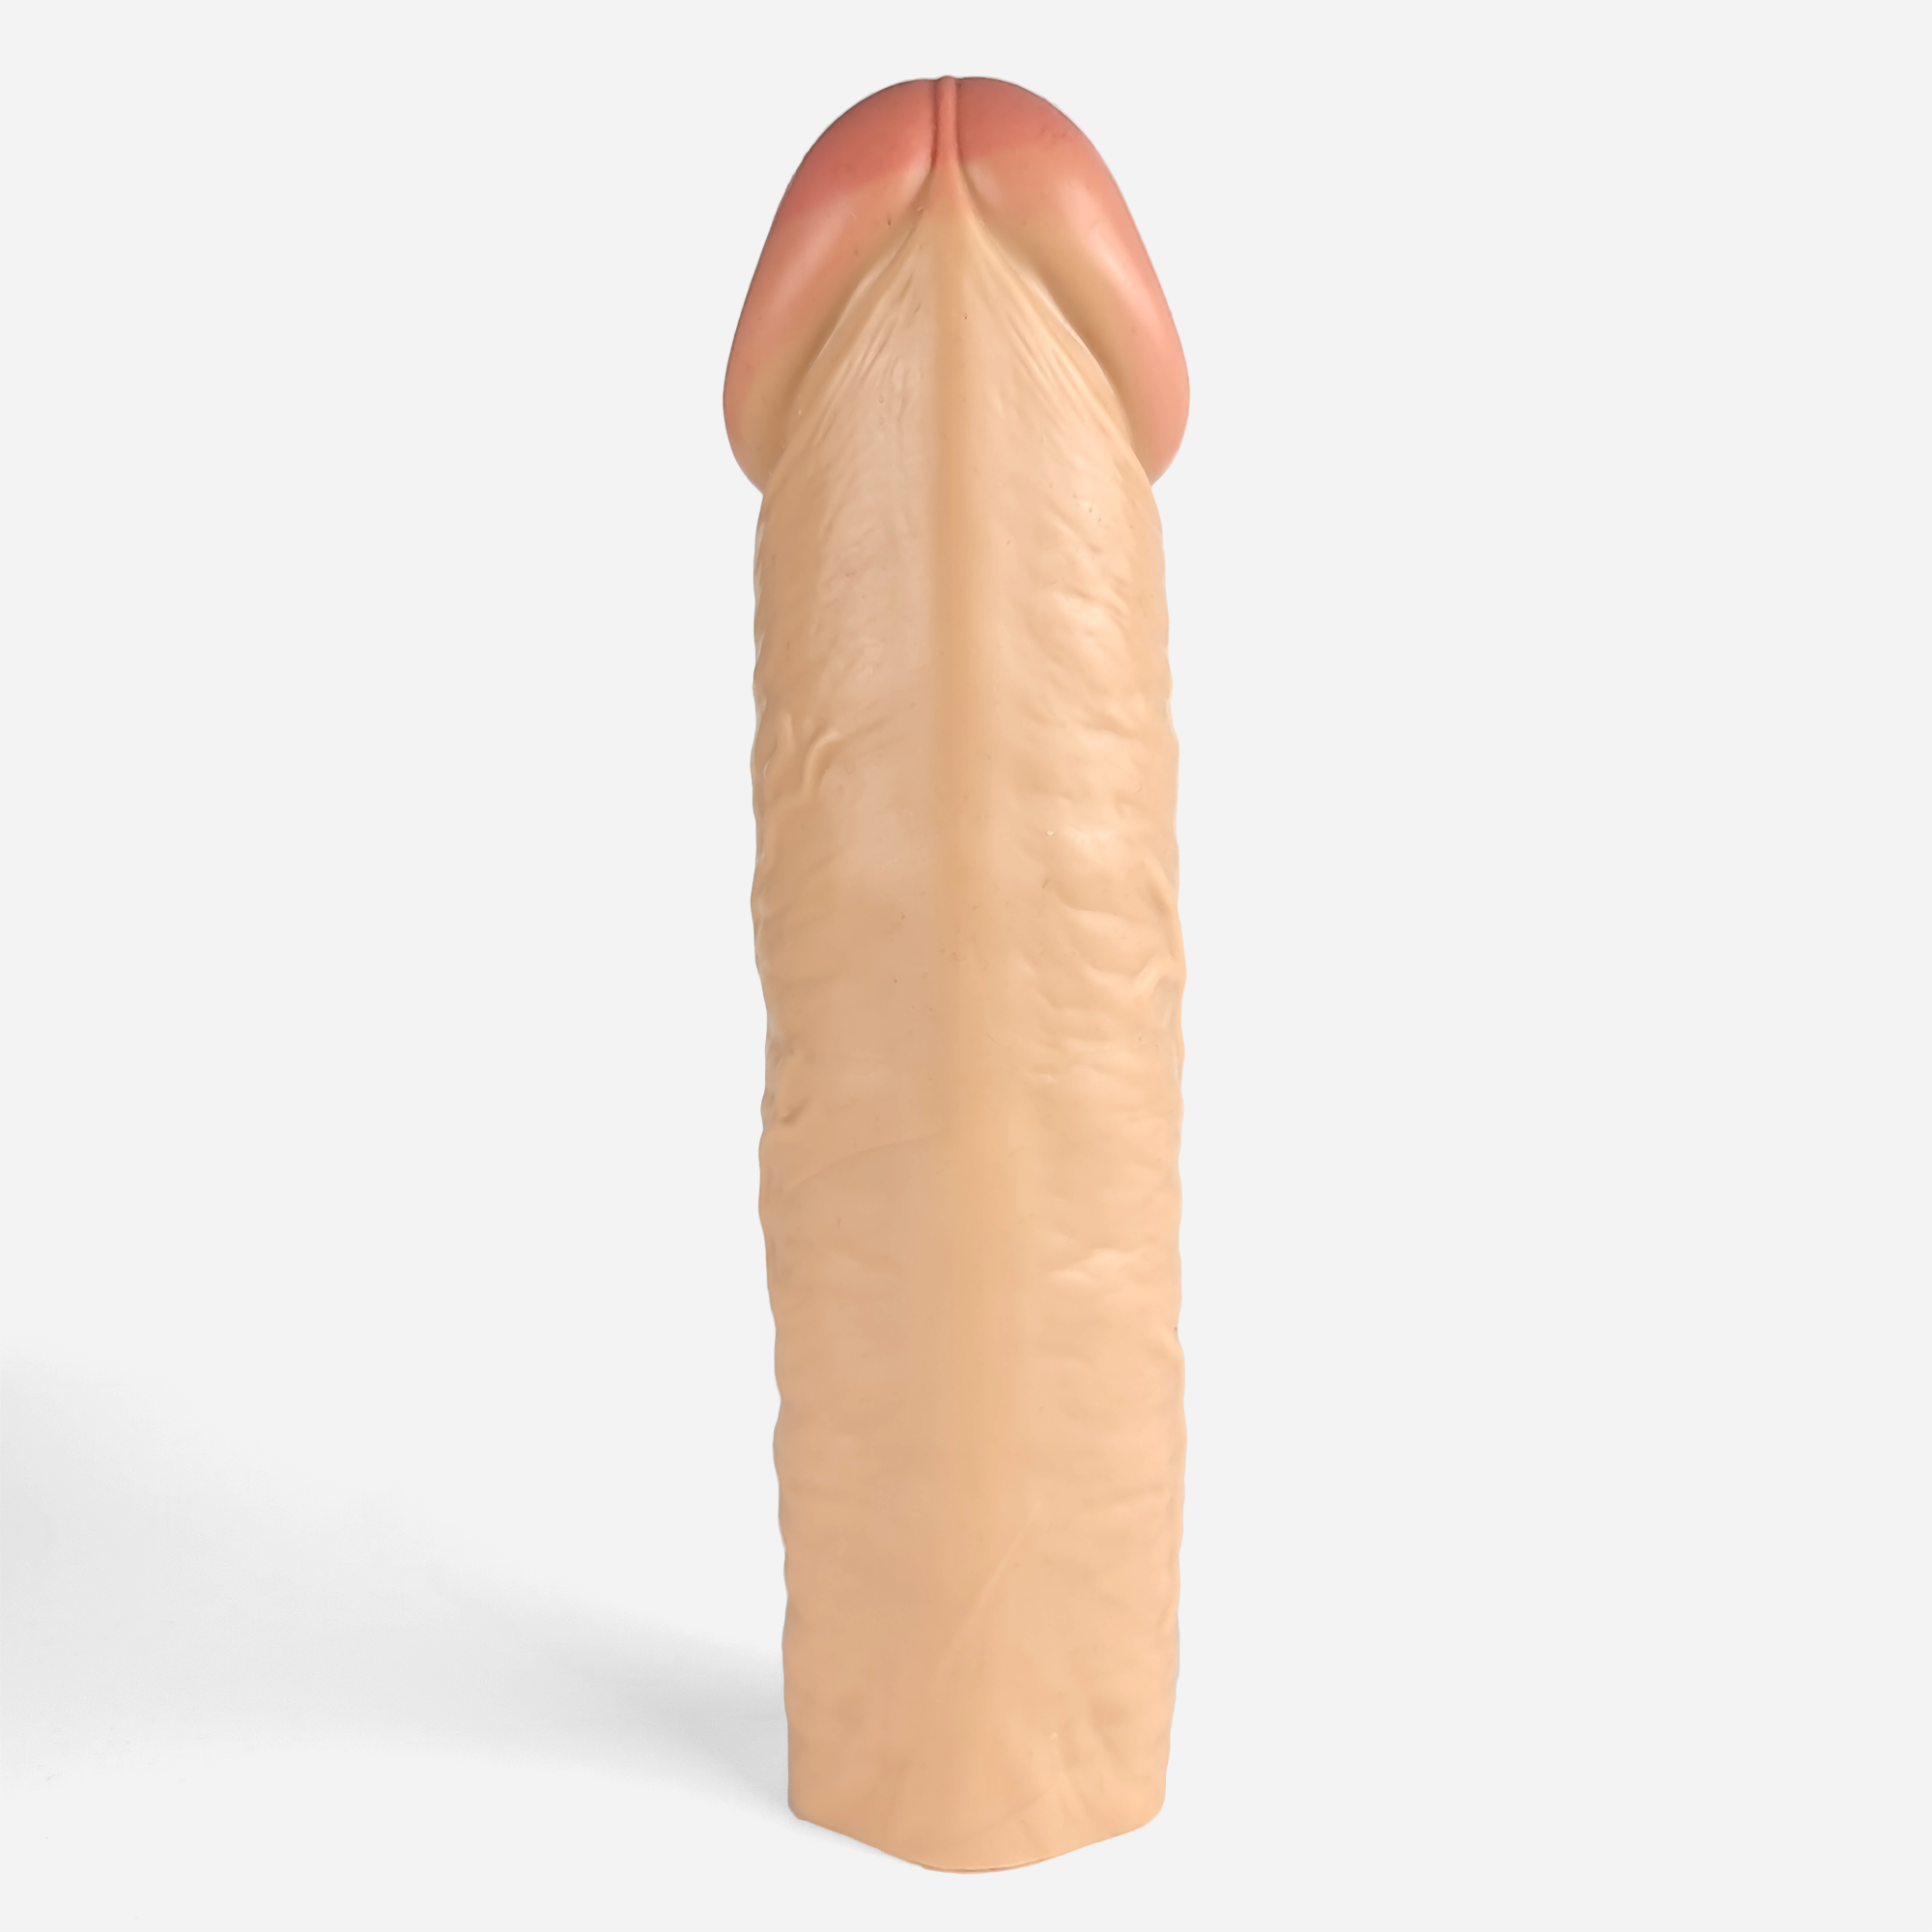 The Made to Measure Penis Extender from Uncover Creations